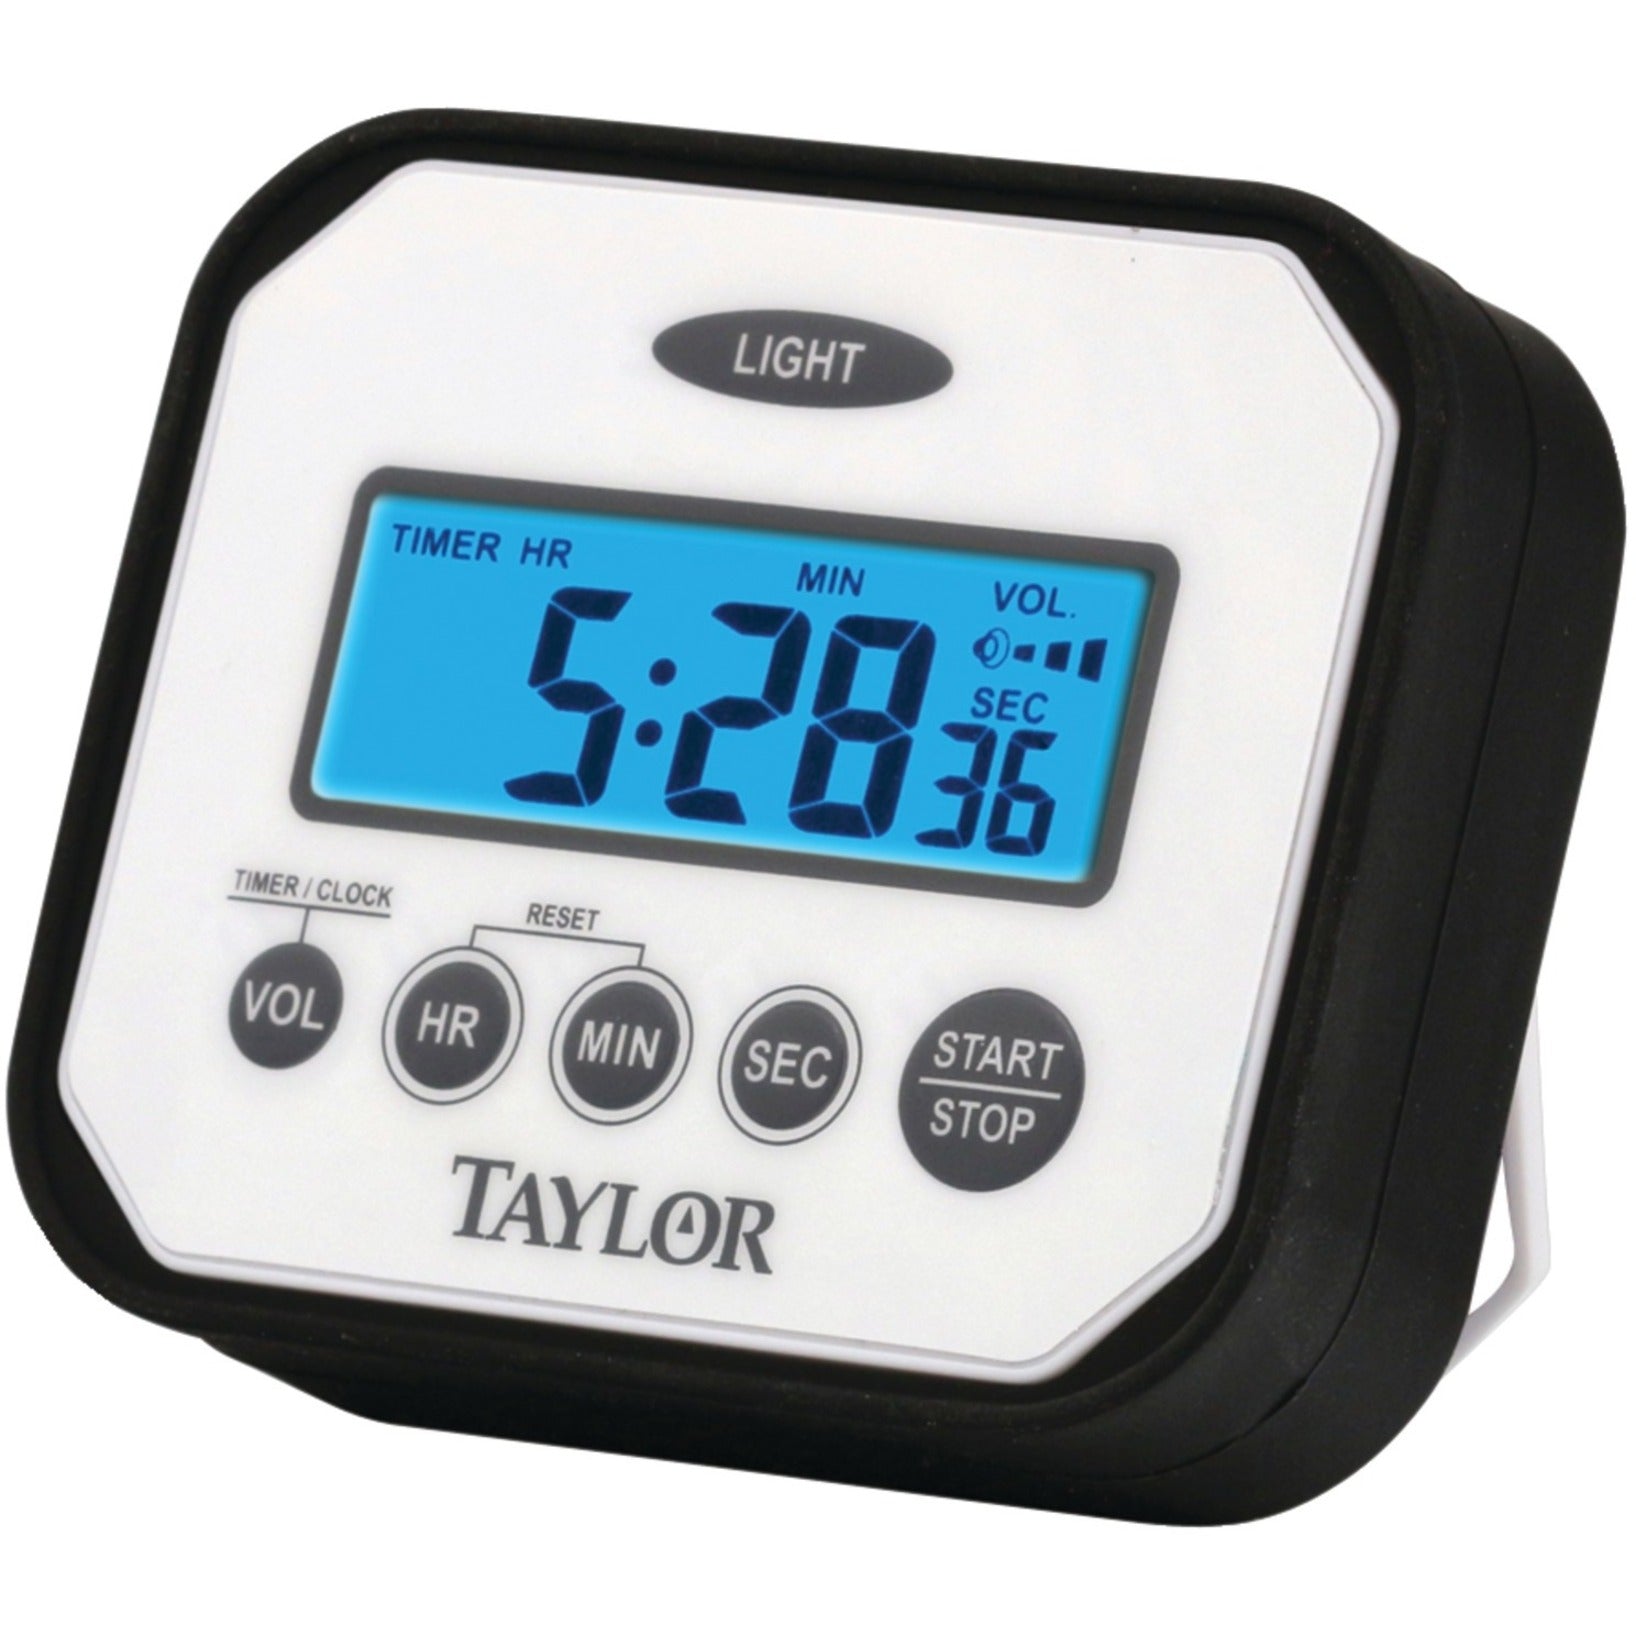 Taylor 5863 Water and Impact Resistant Timer, Dust Resistant, Adjustable Volume, Memory Recall, Count Up, Count Down